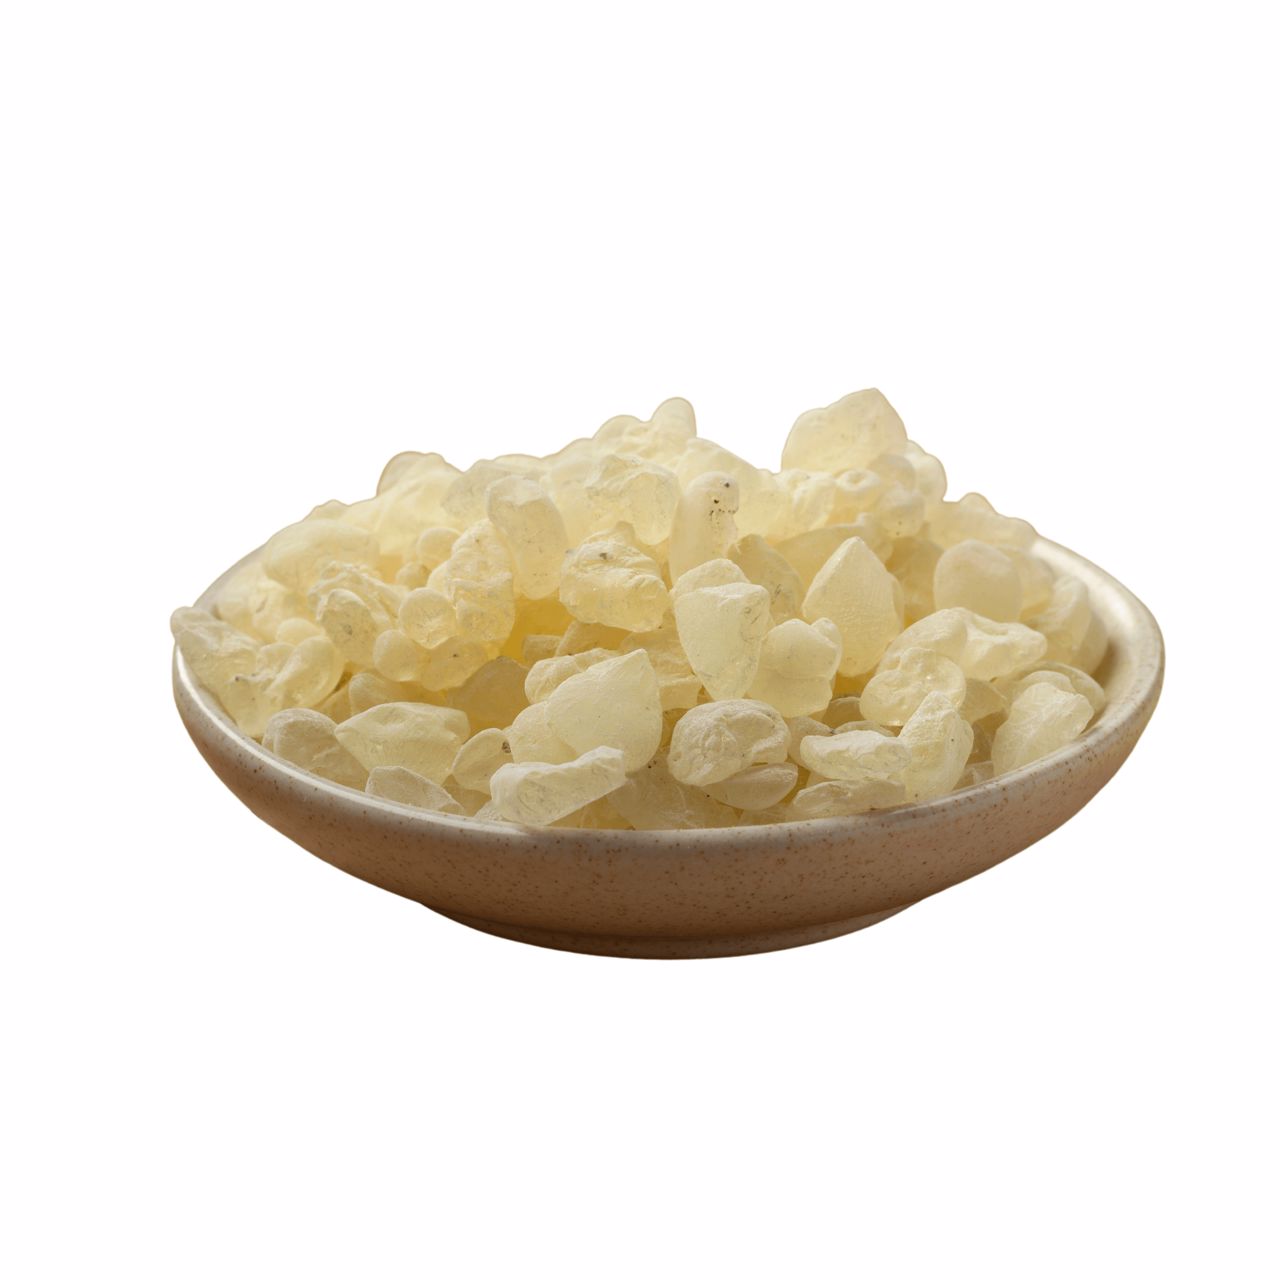 Everything About Chios Mastic Gum